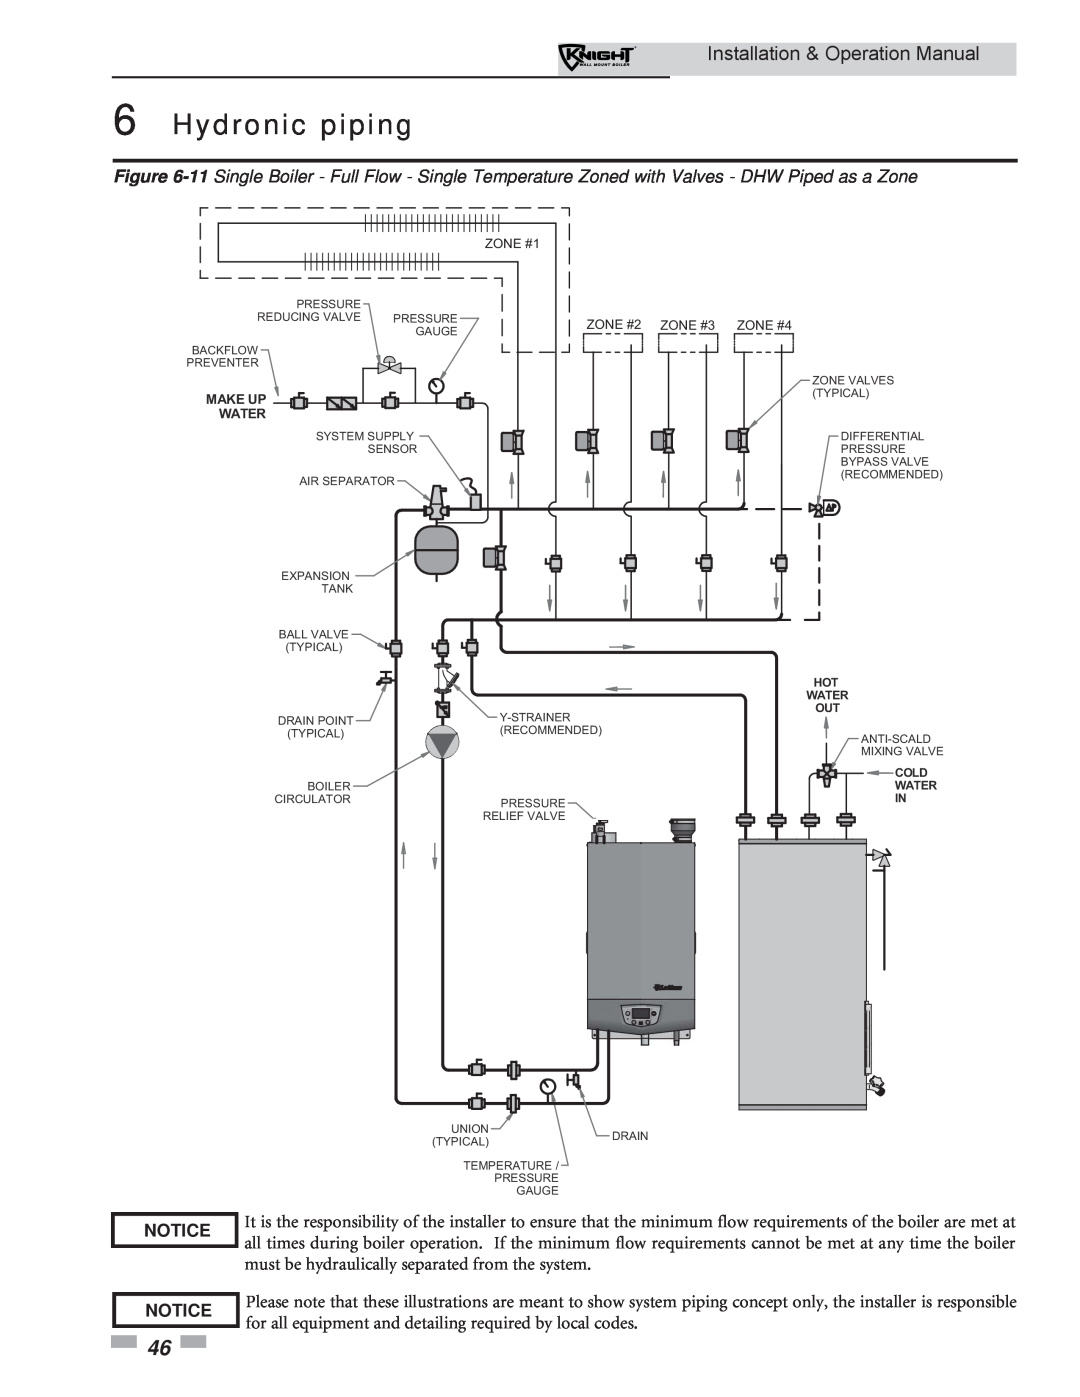 Lochinvar WH 55-399 Hydronic piping, Installation & Operation Manual, Notice Notice, ZONE #1, ZONE #2 ZONE #3 ZONE#4 